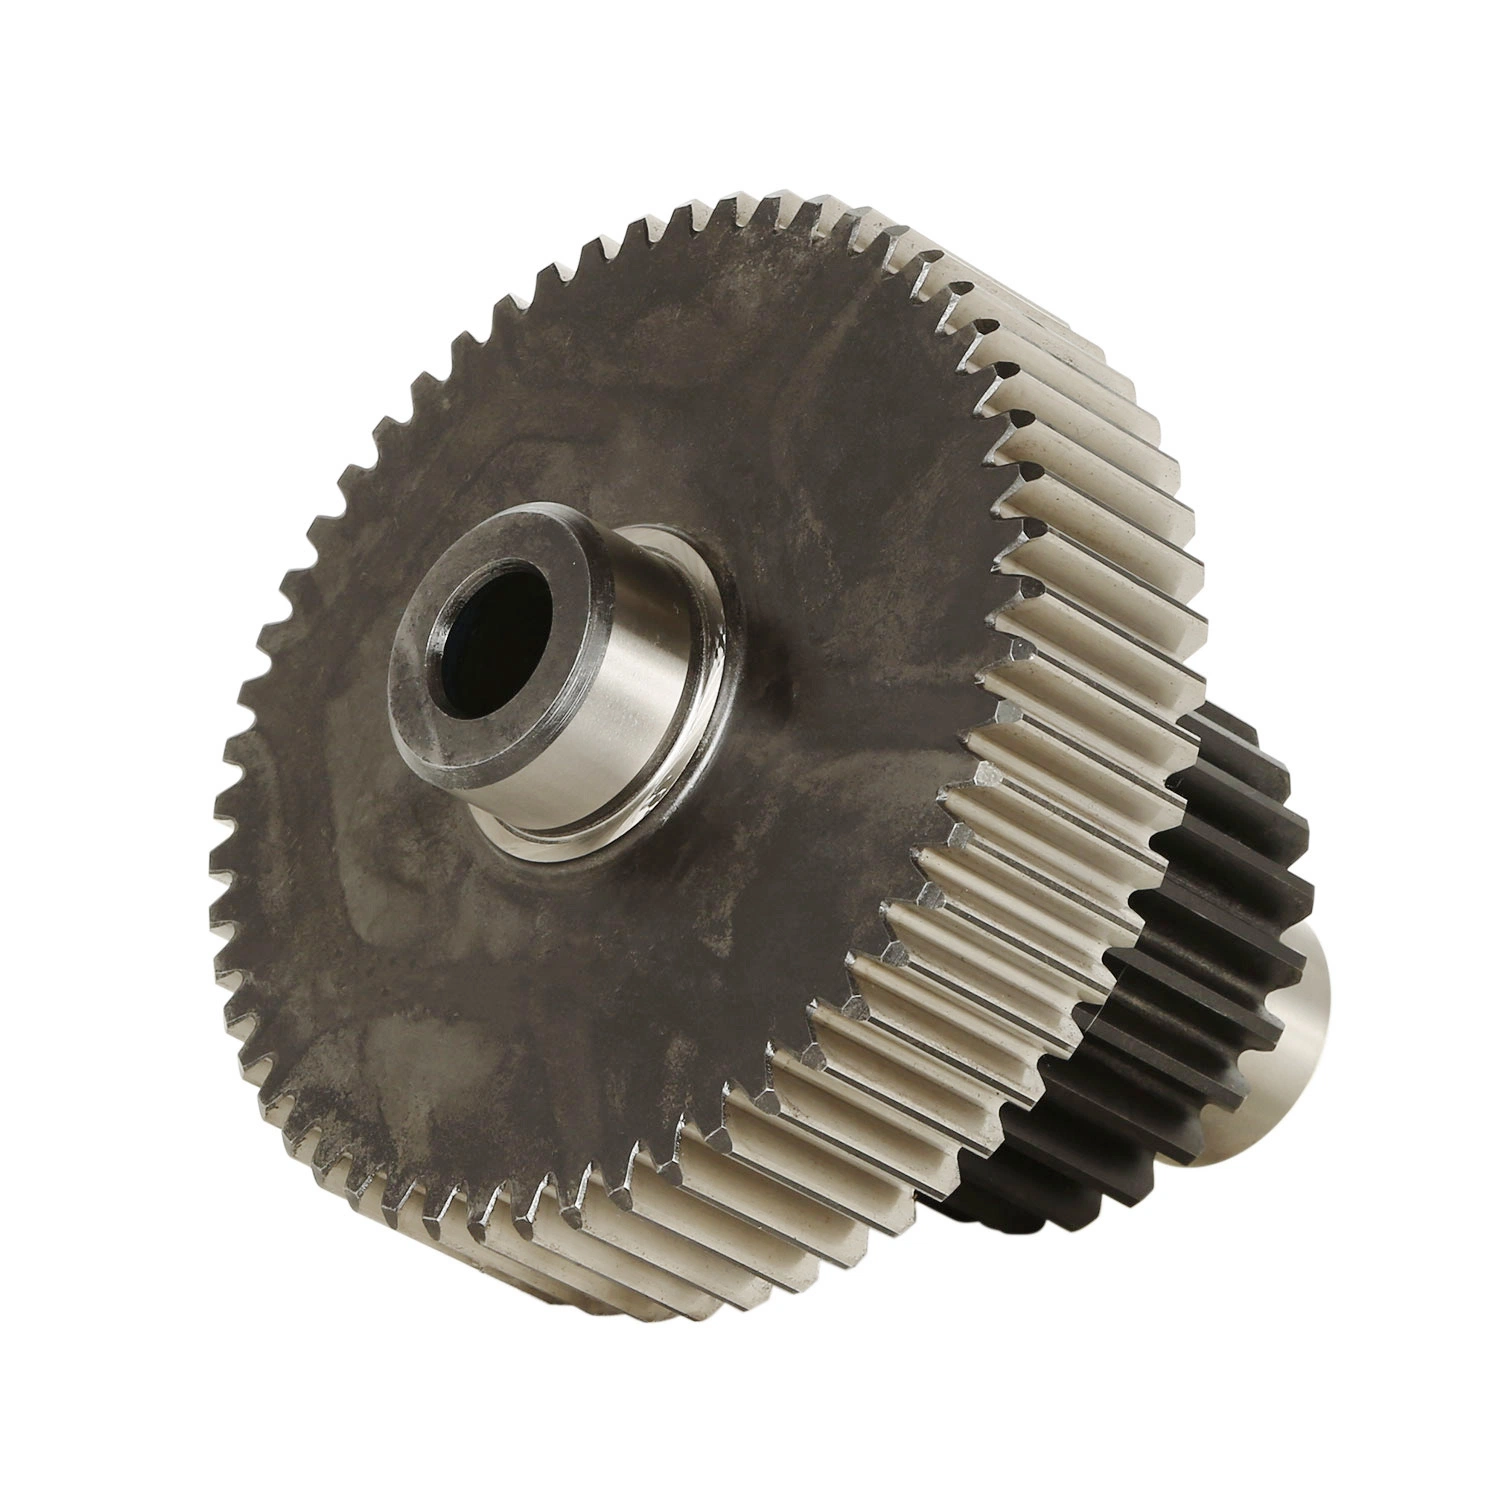 Gtig Transmission Gear with Nonstandard Gear for Various Machine